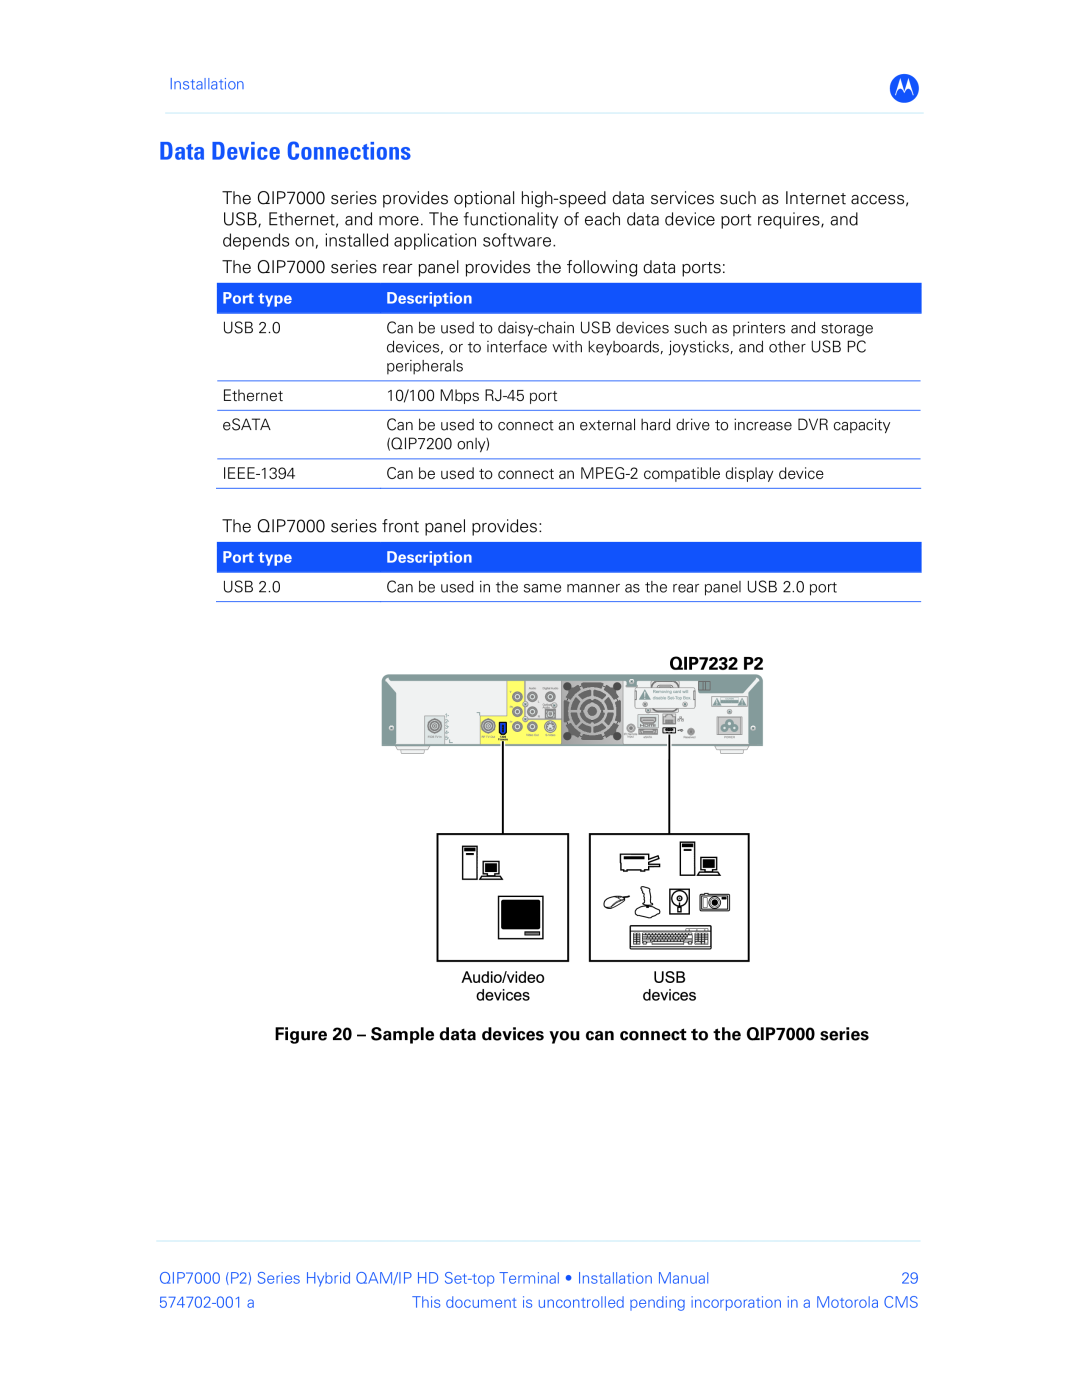 Motorola installation manual Data Device Connections, Sample data devices you can connect to the QIP7000 series 